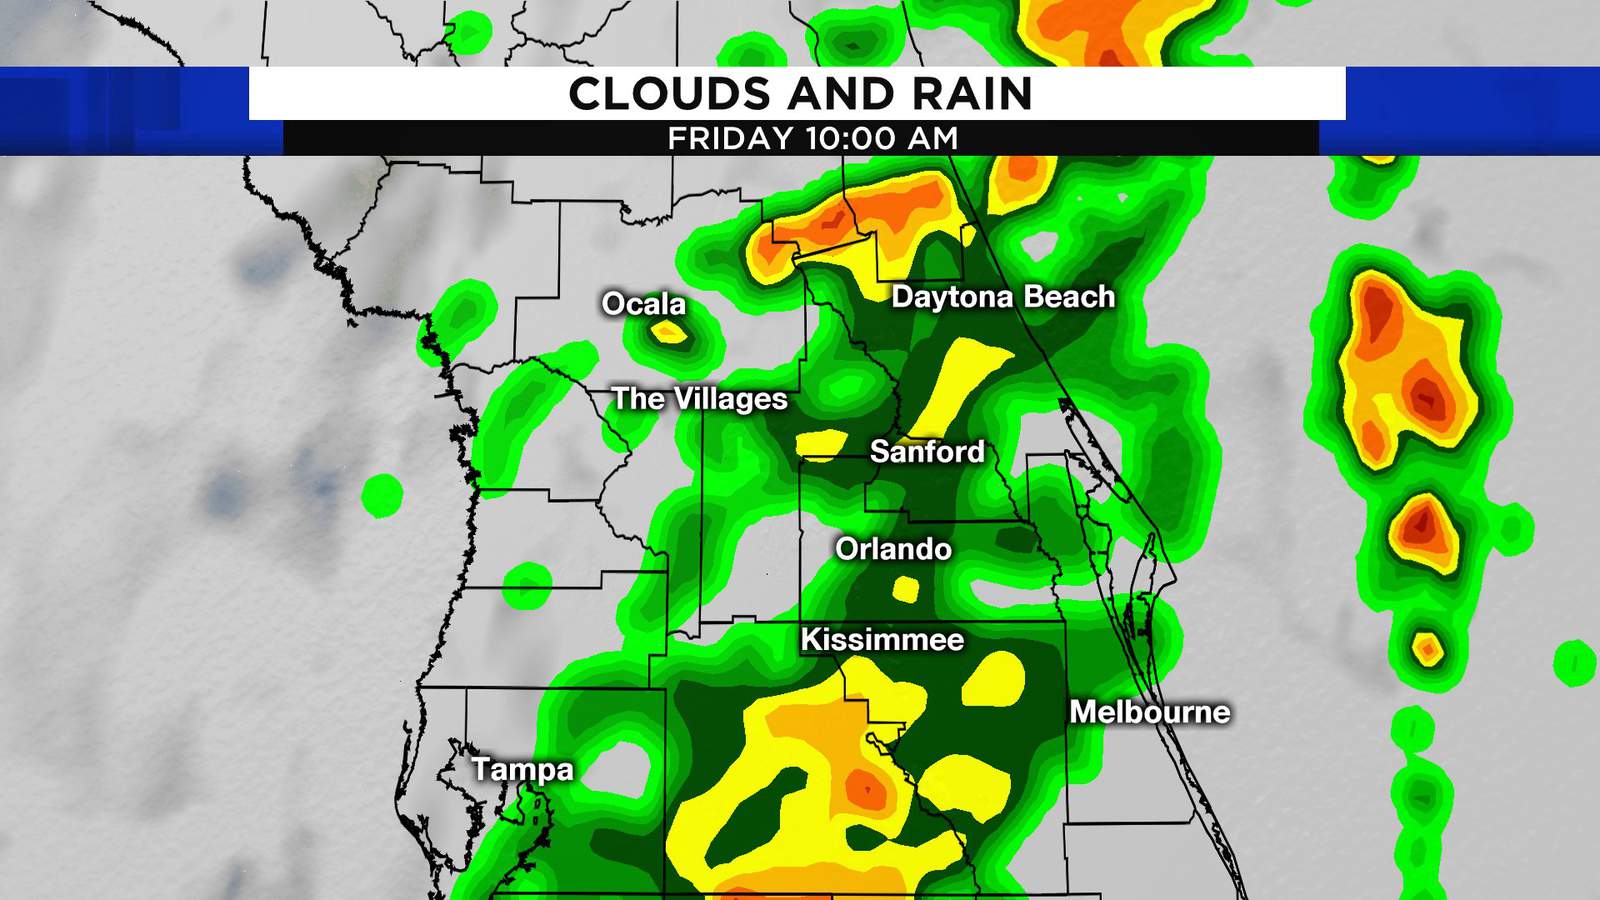 New Front Brings Rain To Central Florida